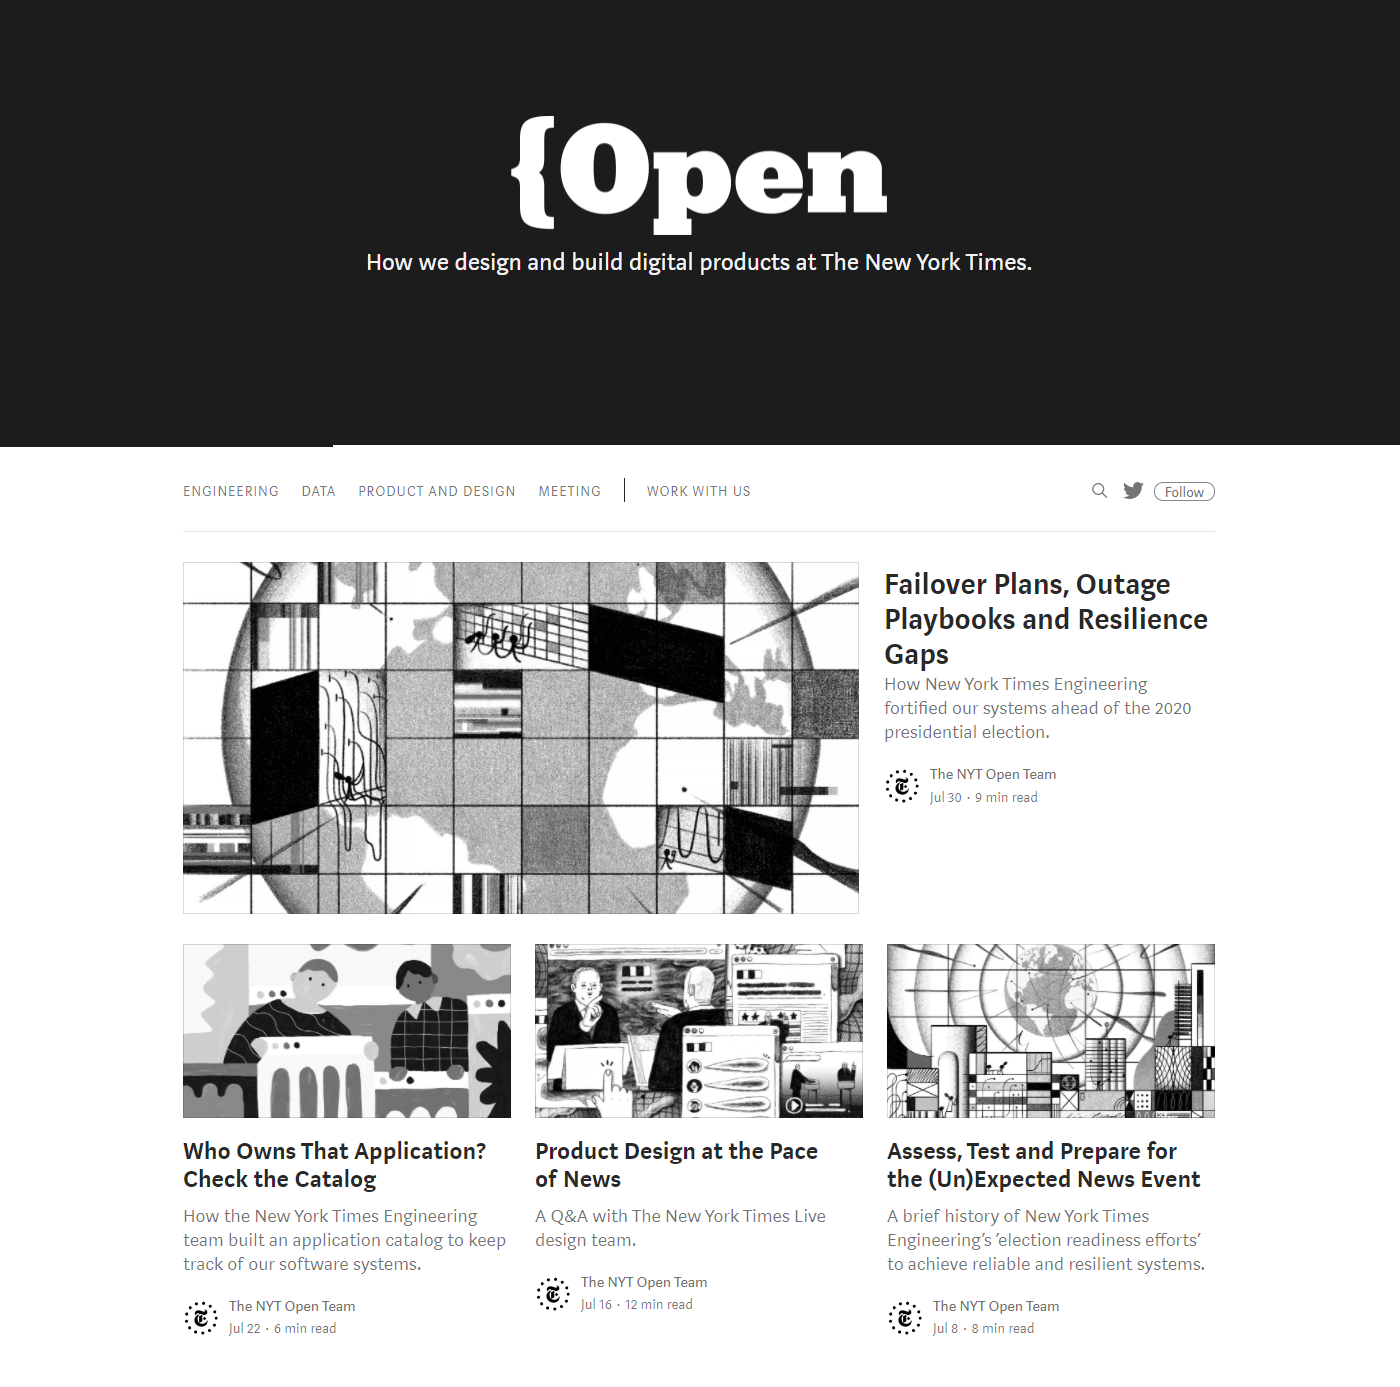 The homepage of Open, a New York Times microsite.